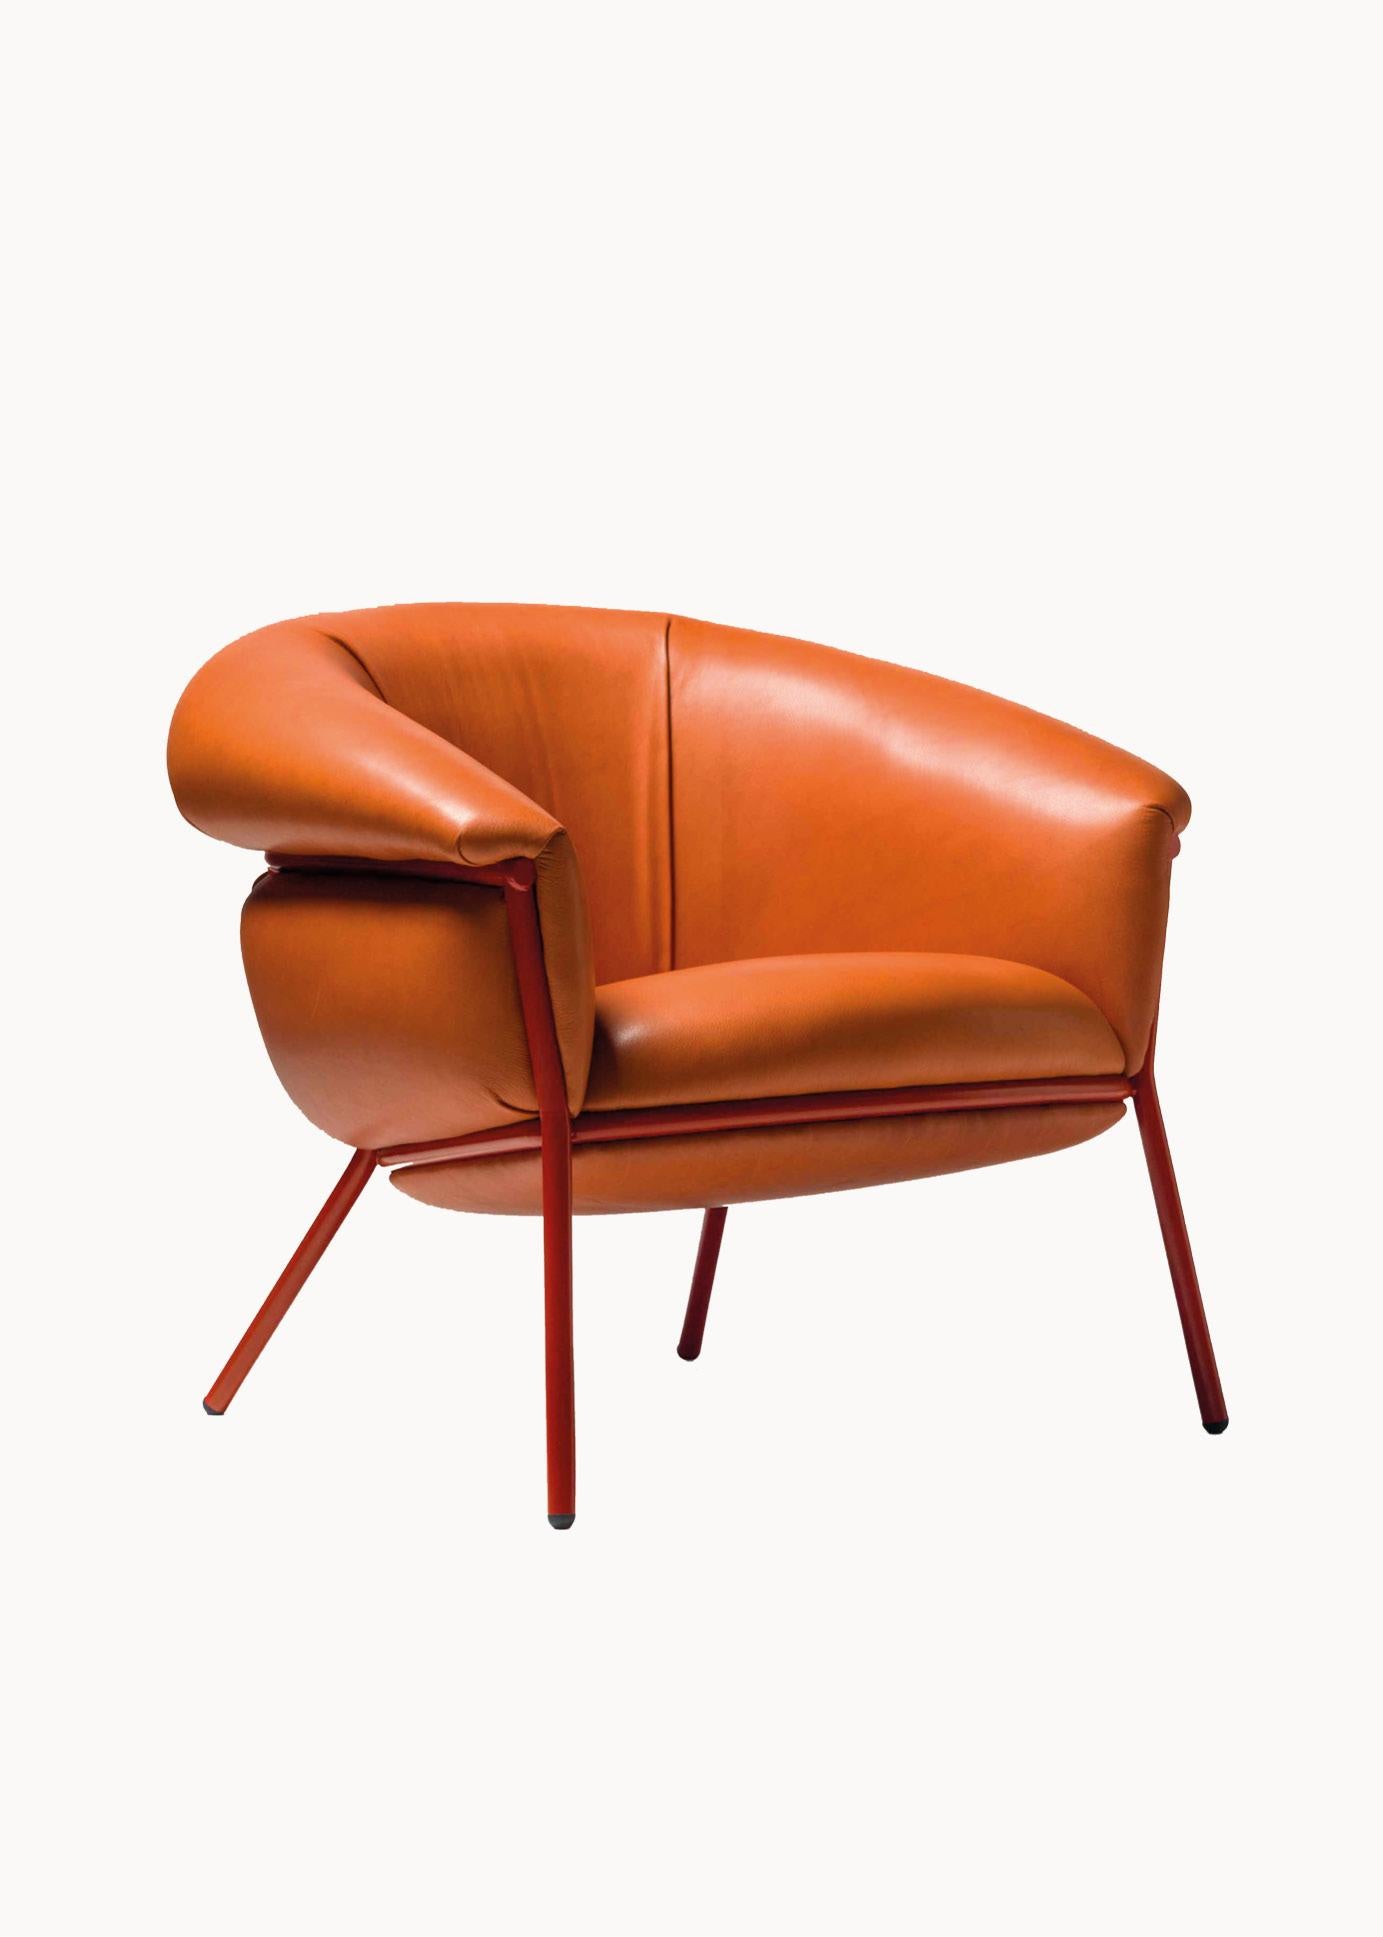 Grasso armchair + footstool by Stephen Burks organge leather red metal structure In New Condition For Sale In Barcelona, ES